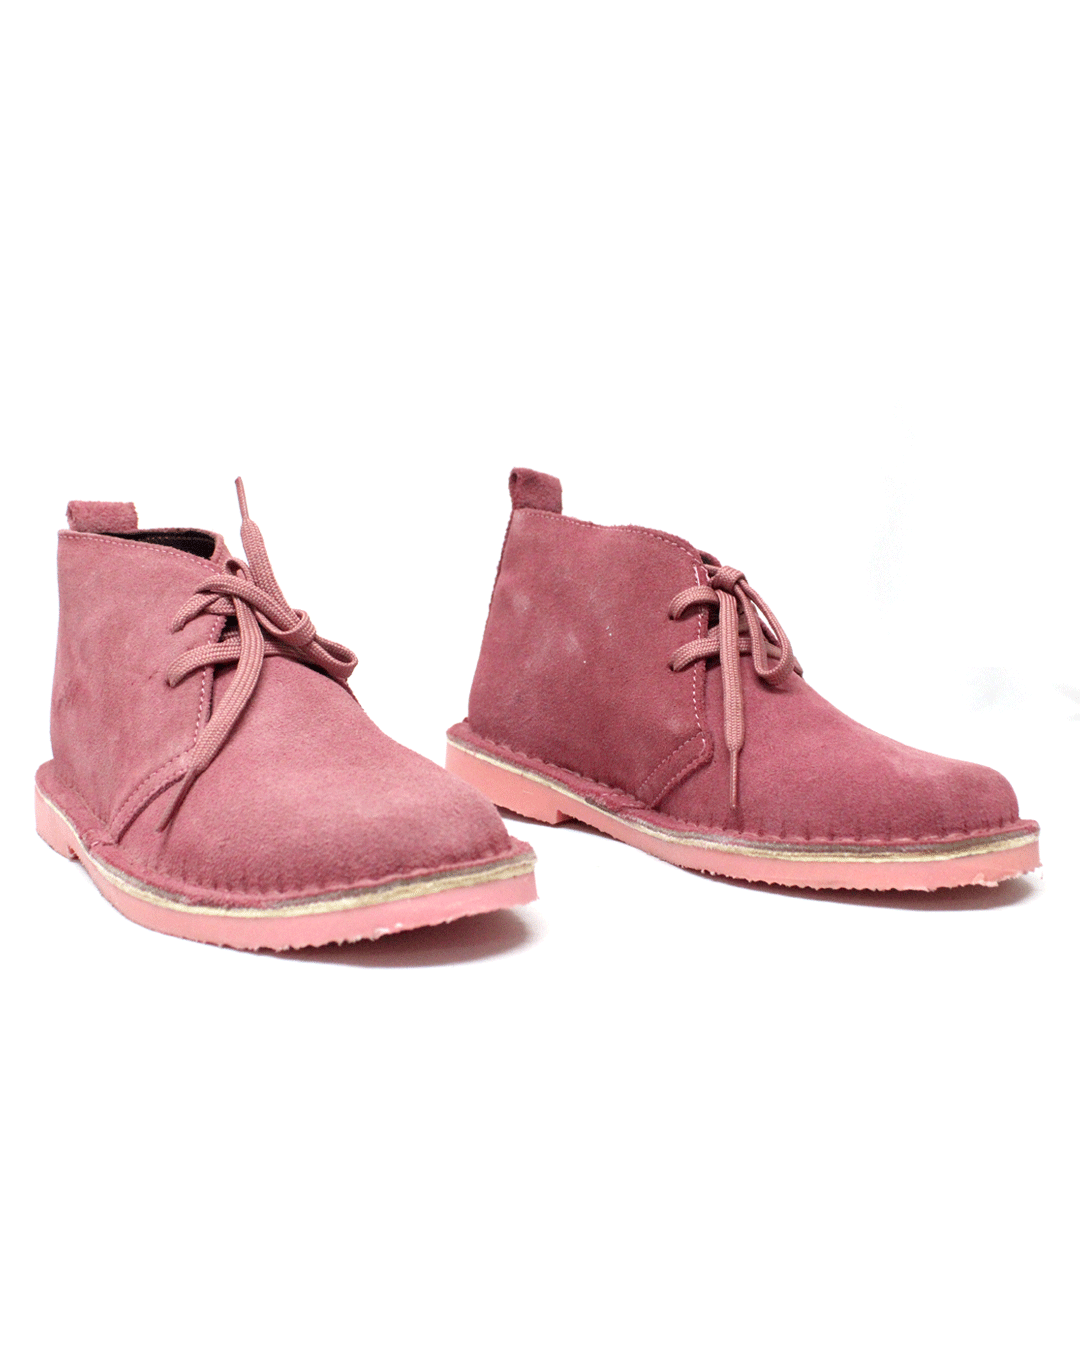 DESERT Pink Lace Up Boot